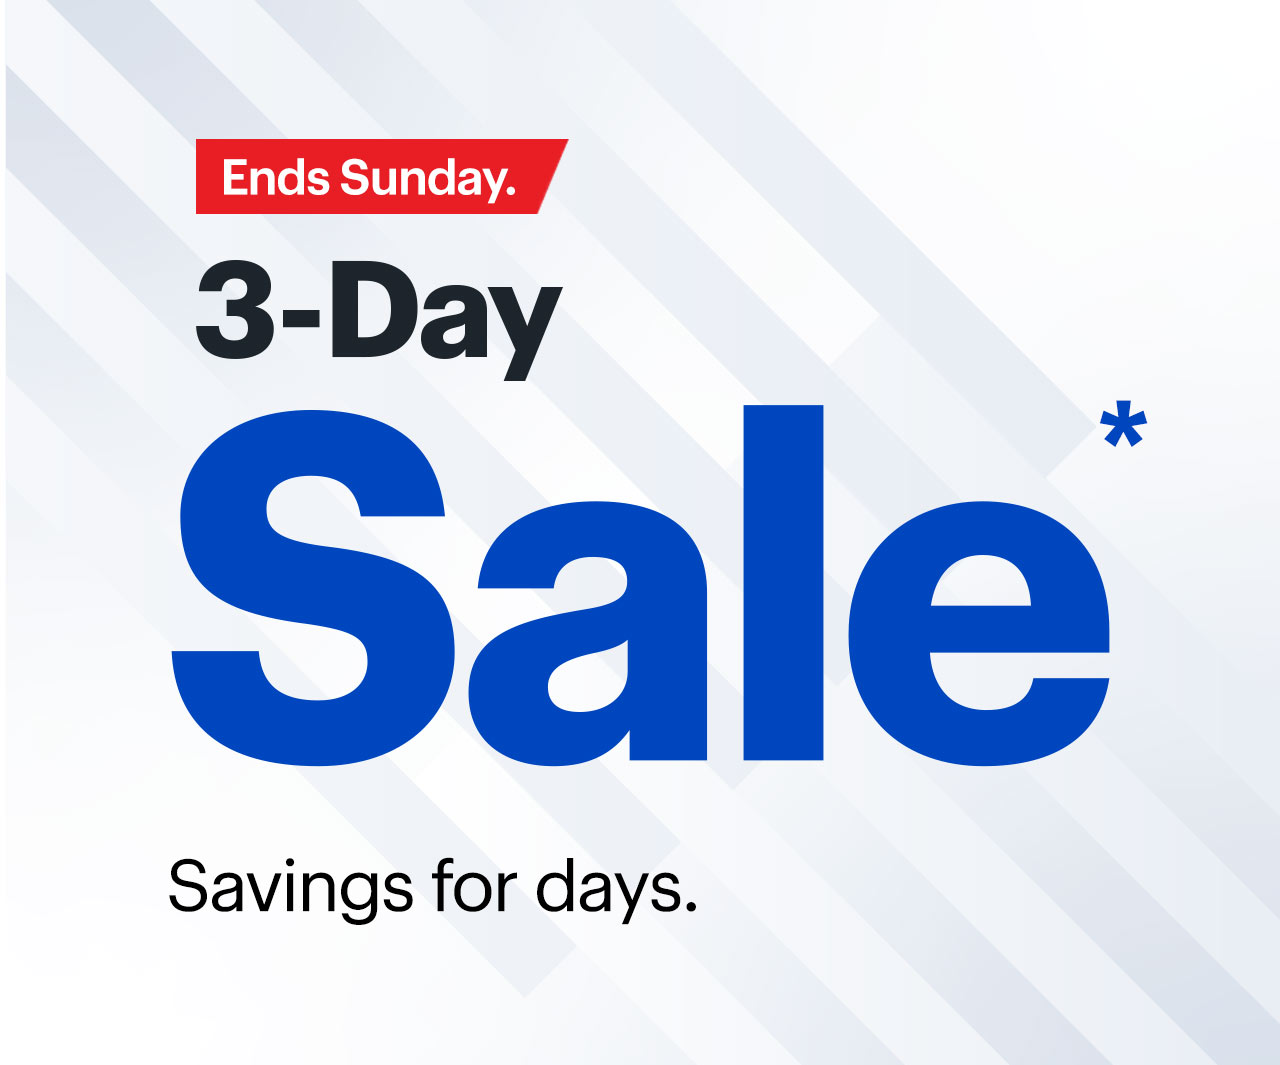 3-Day Sale Ends Sunday. Savings for days. Reference disclaimer.